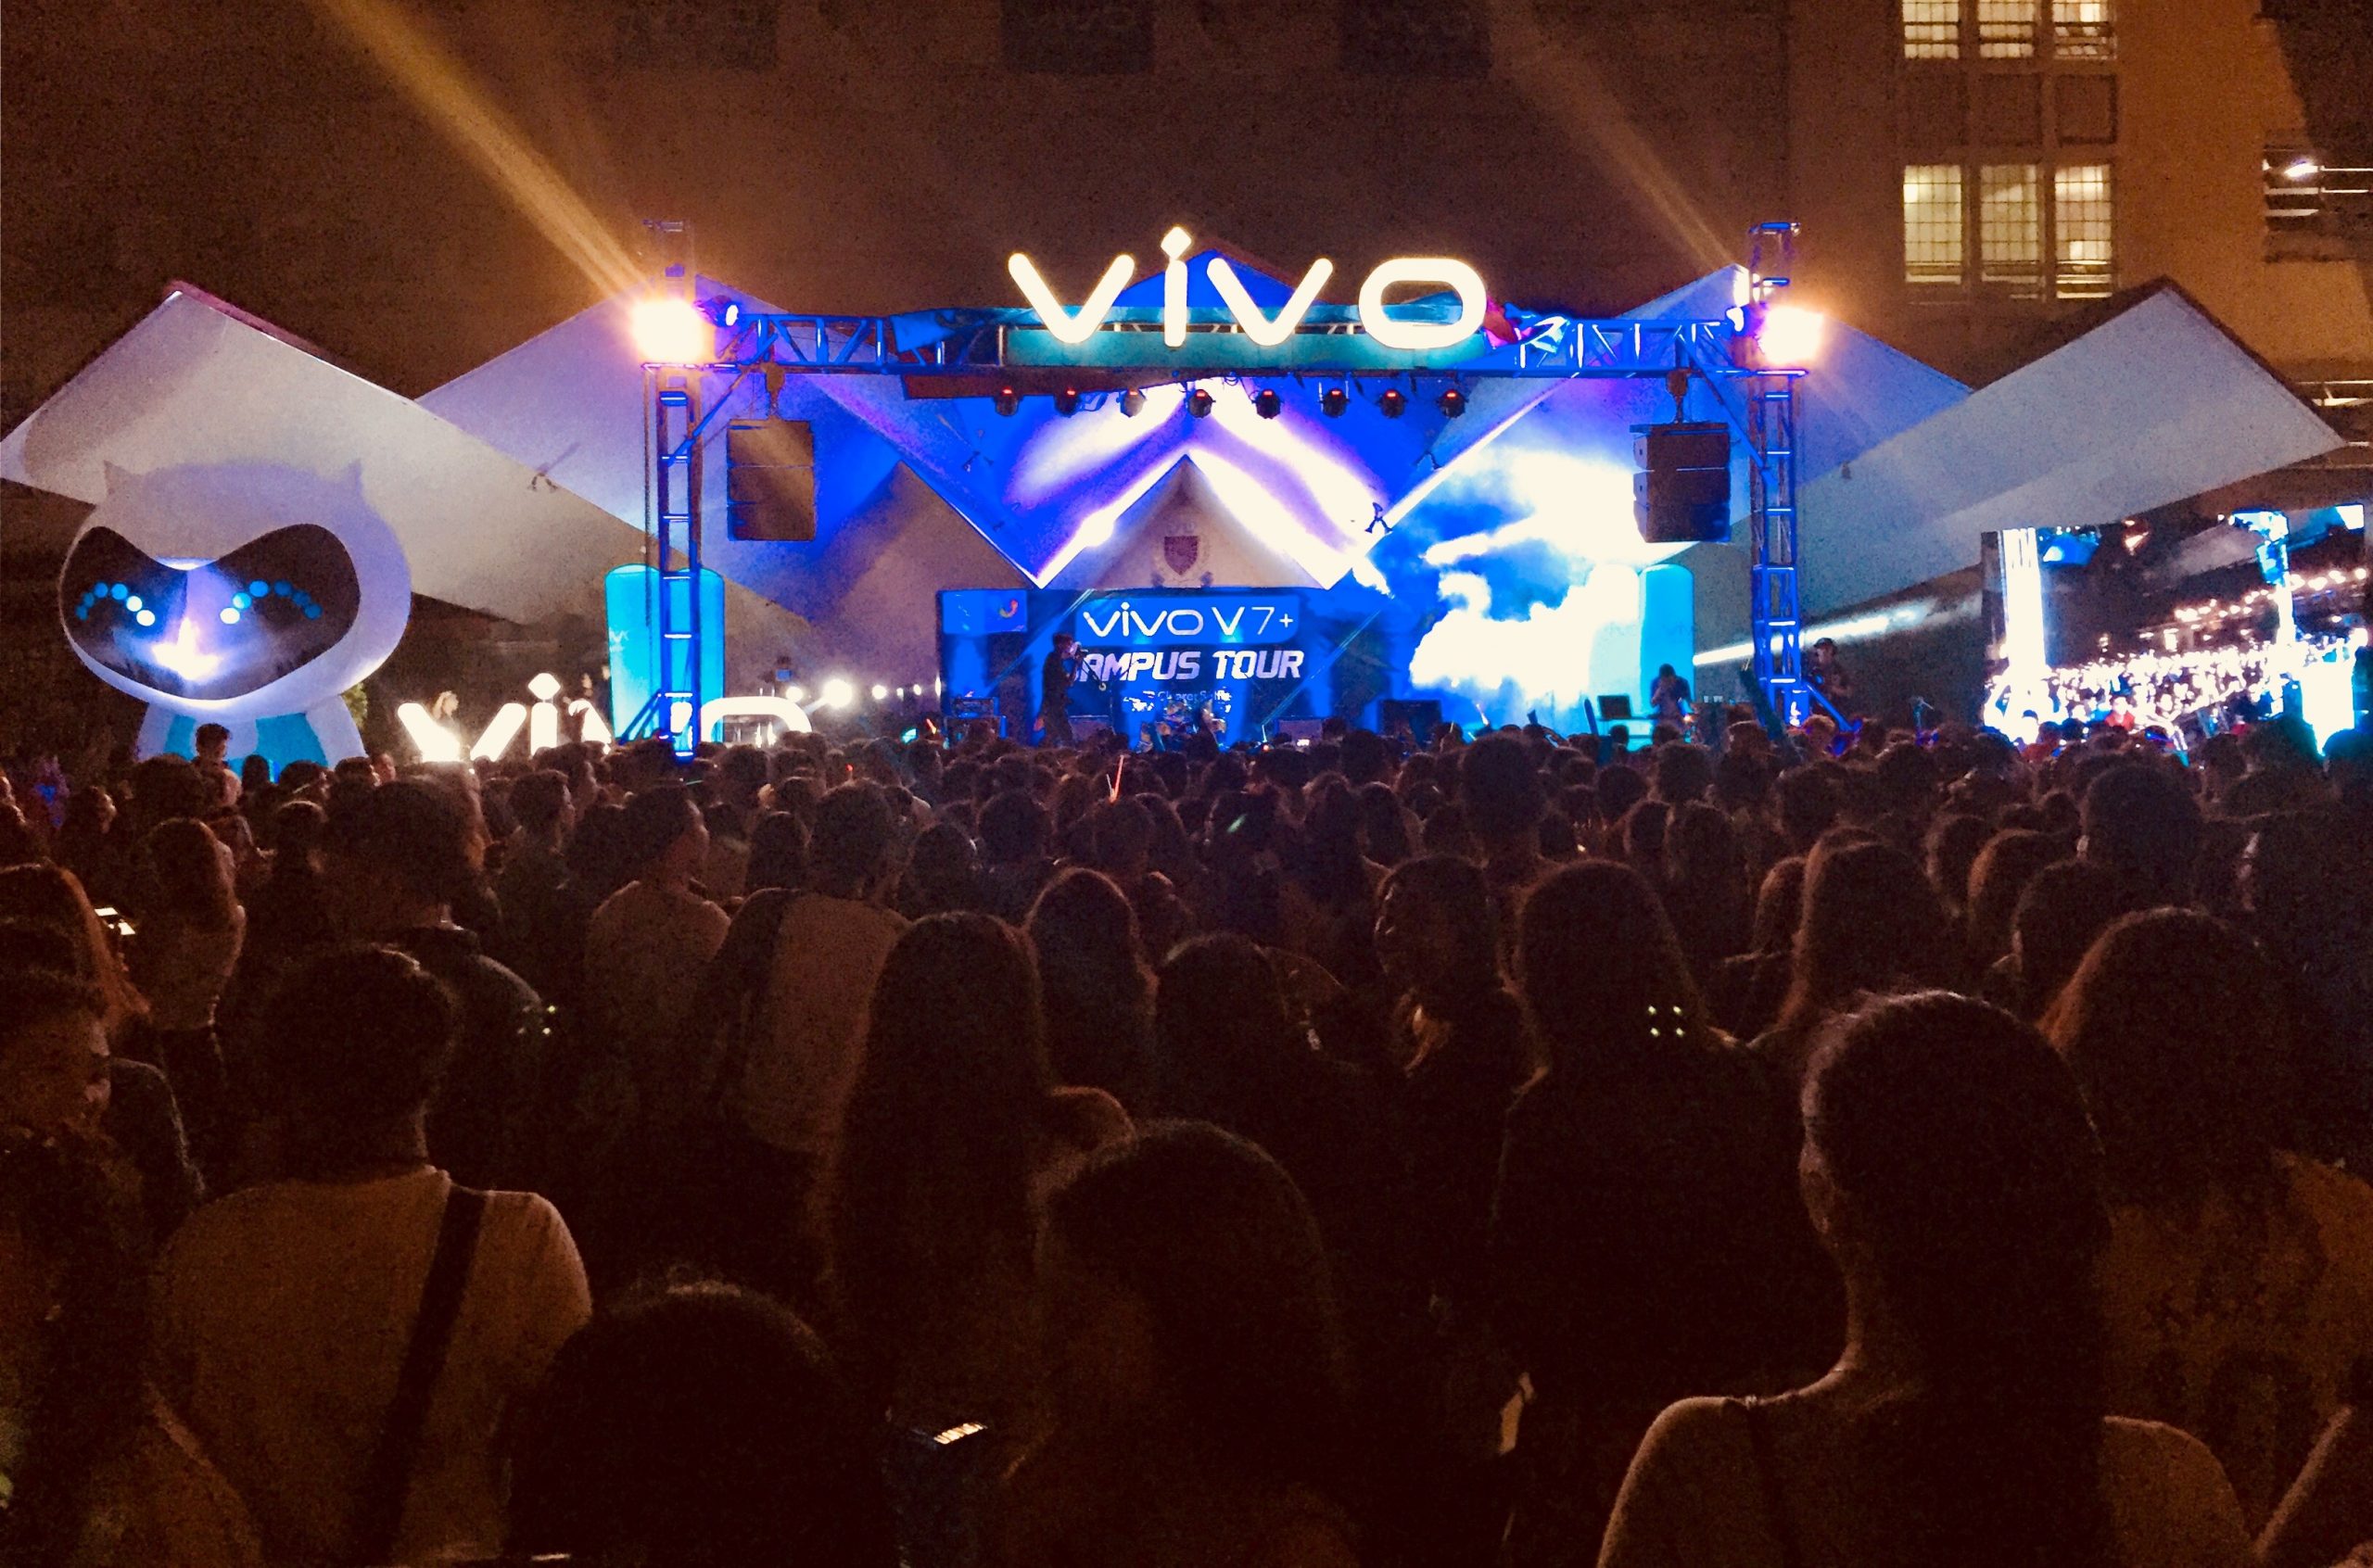 Vivo co-presents the UST Paskuhan 2017